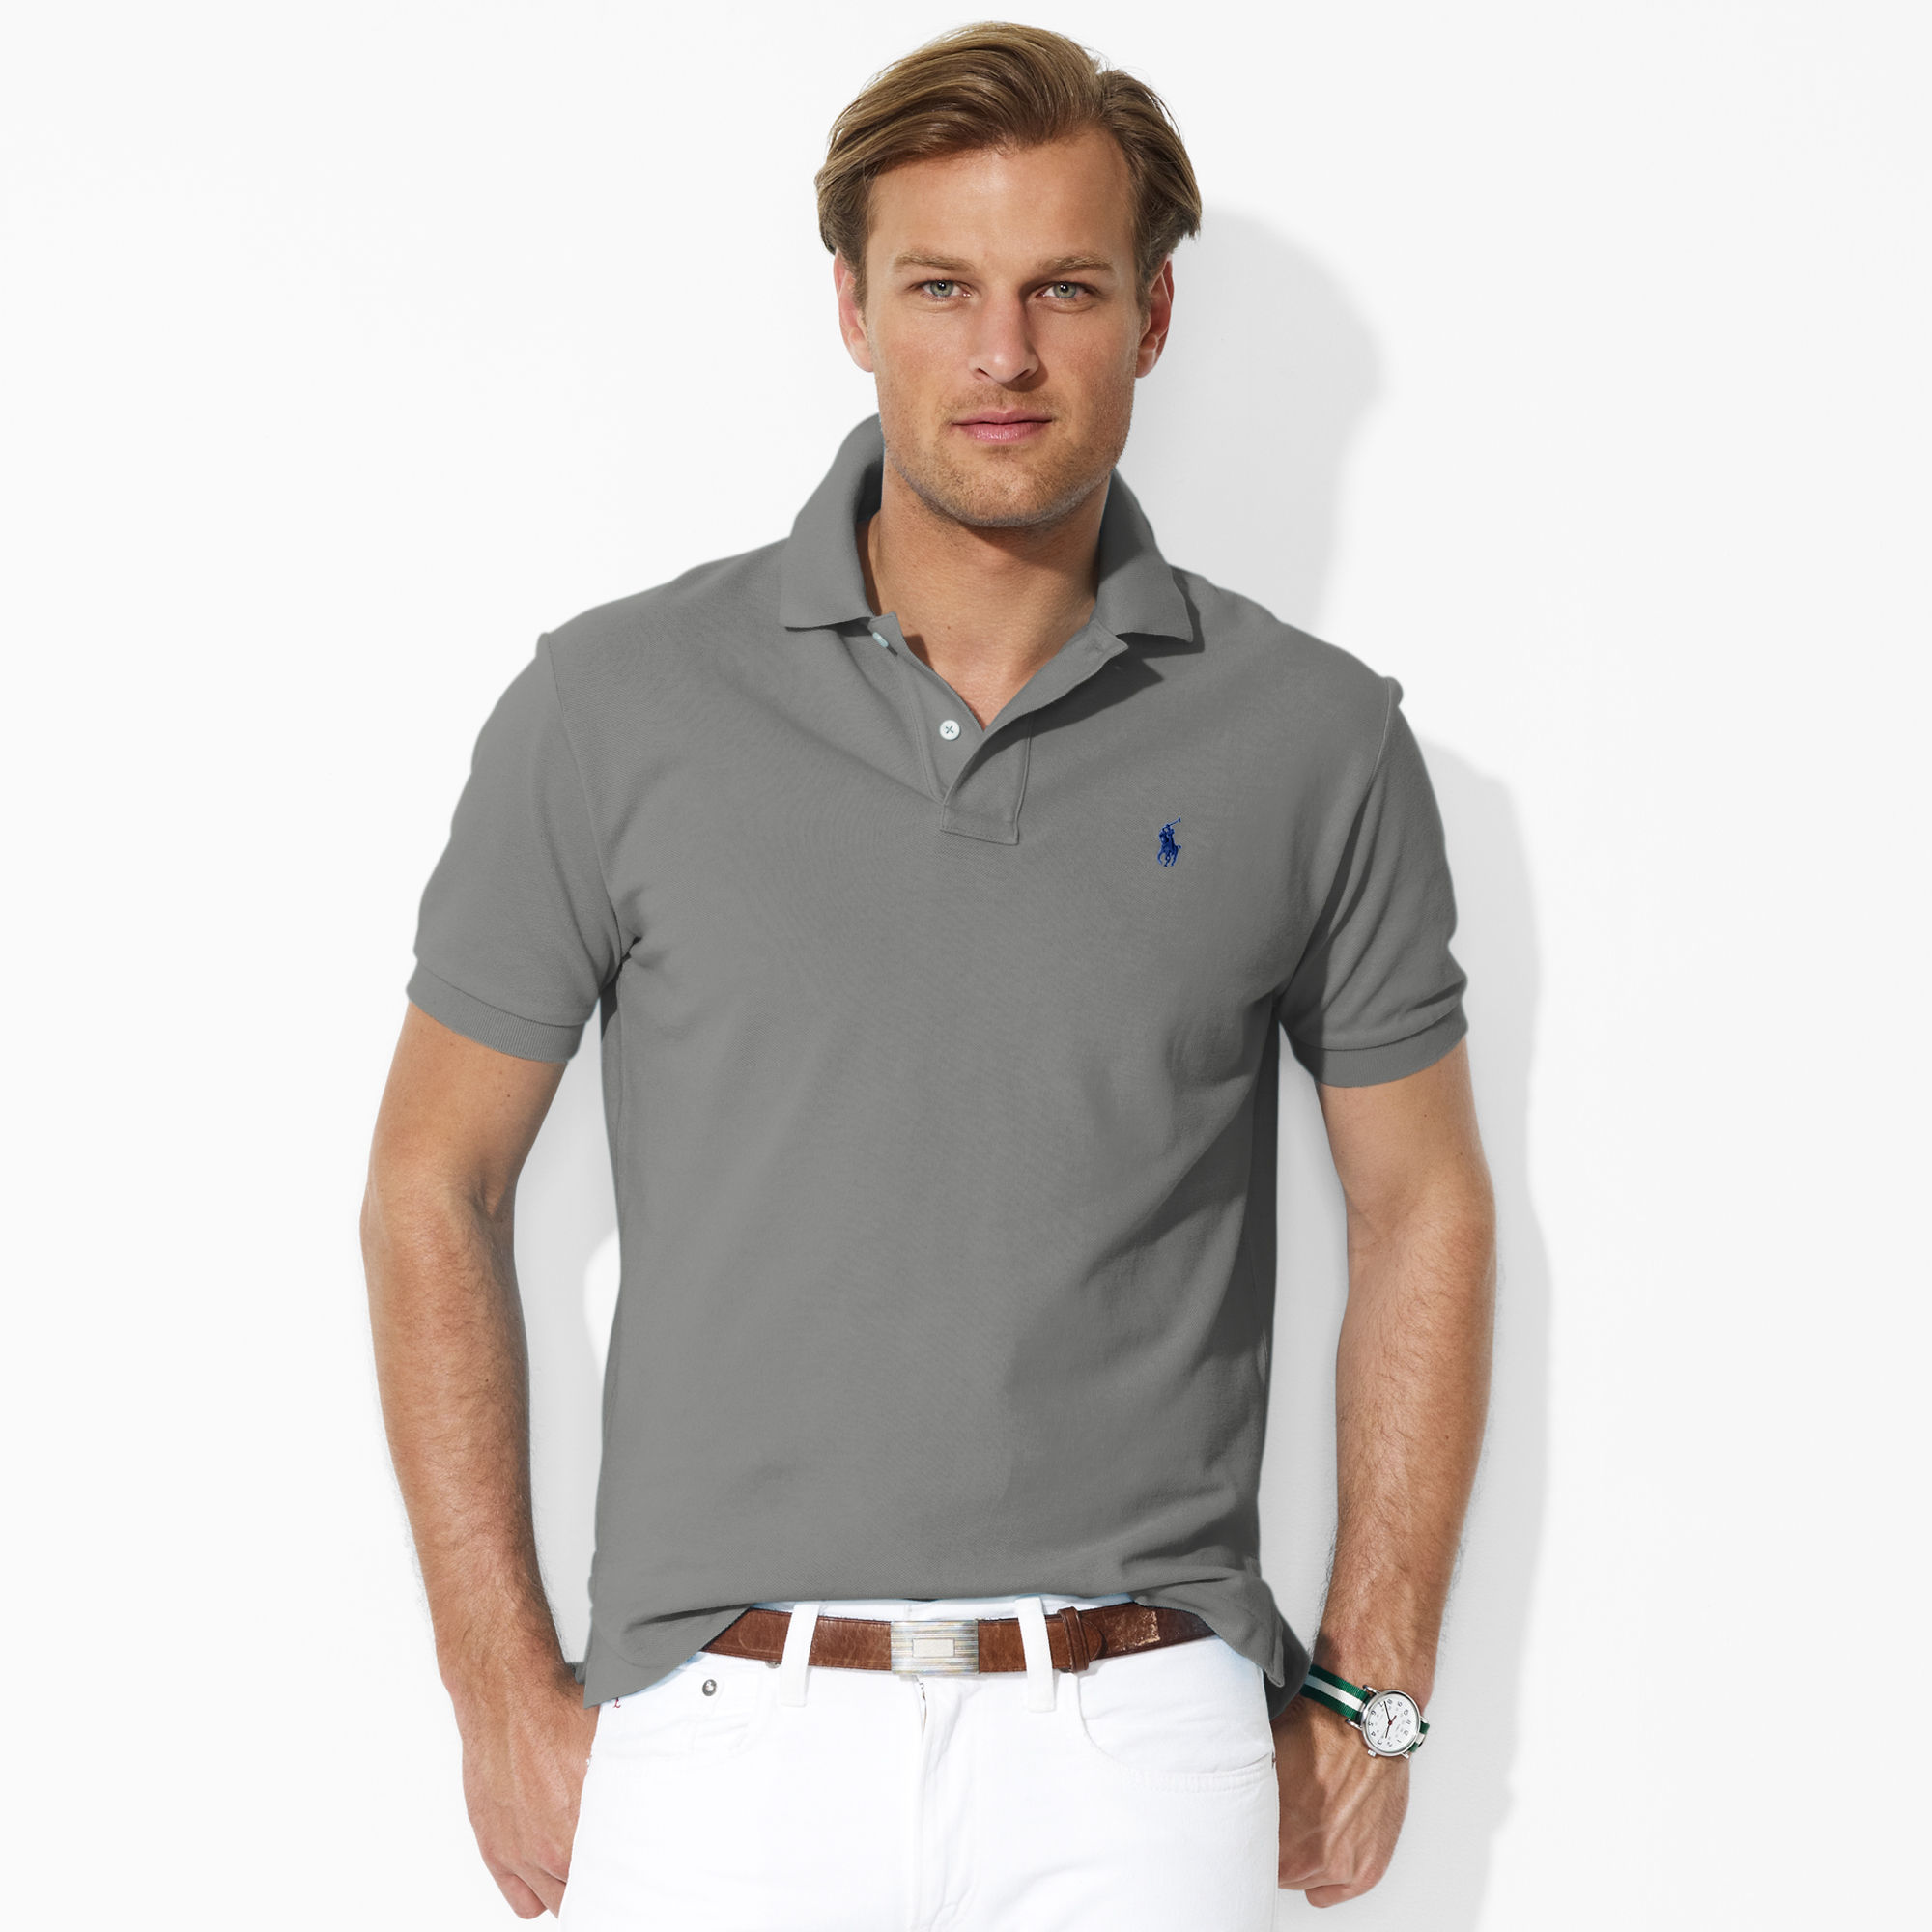 CLASSIC-FIT MESH POLO